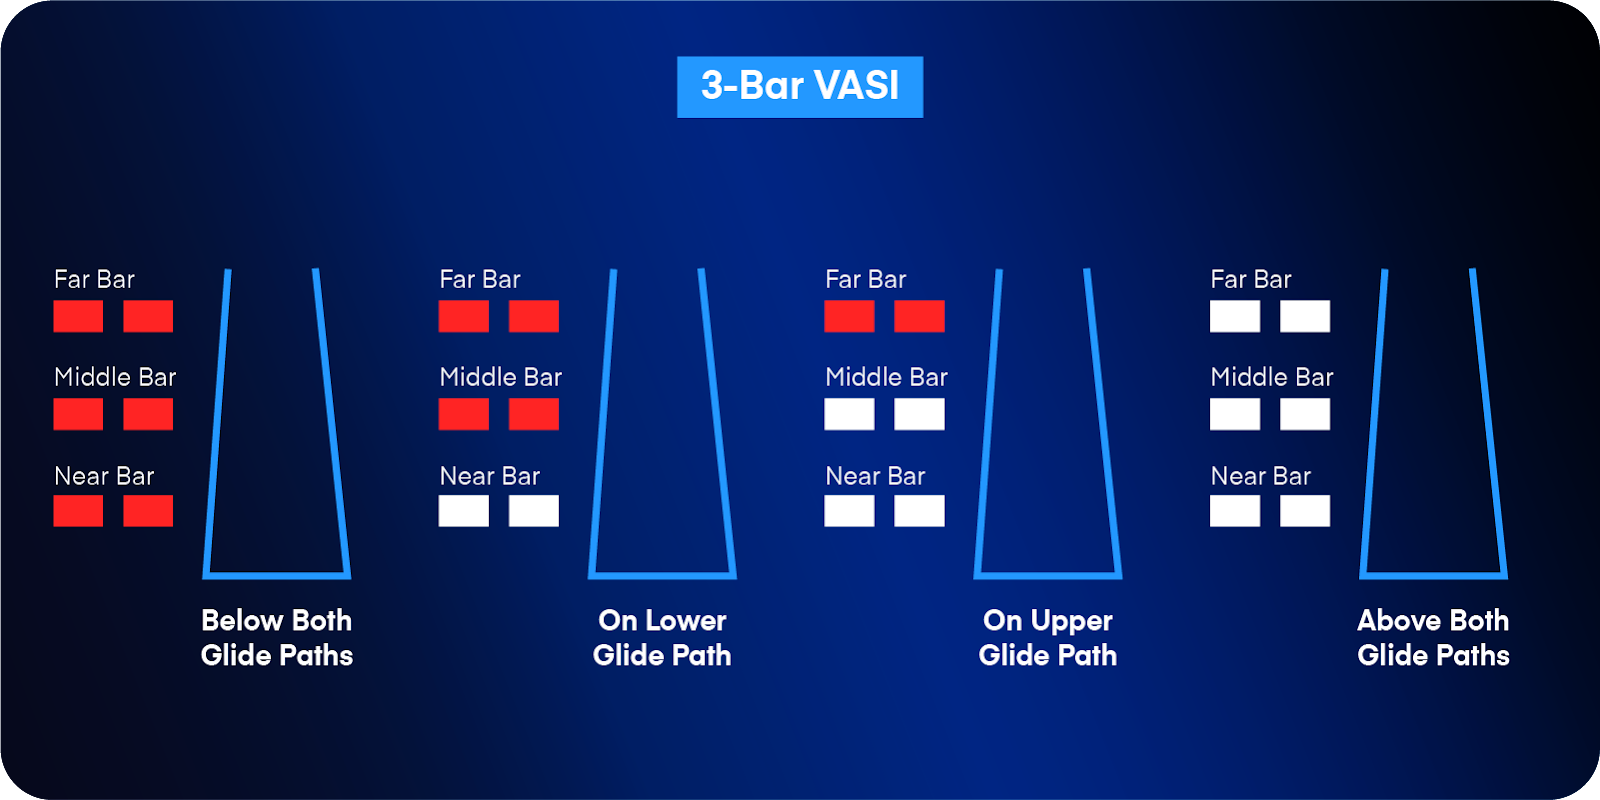 A diagram showing how a 3-bar VASI informs pilots of their glide path position. 